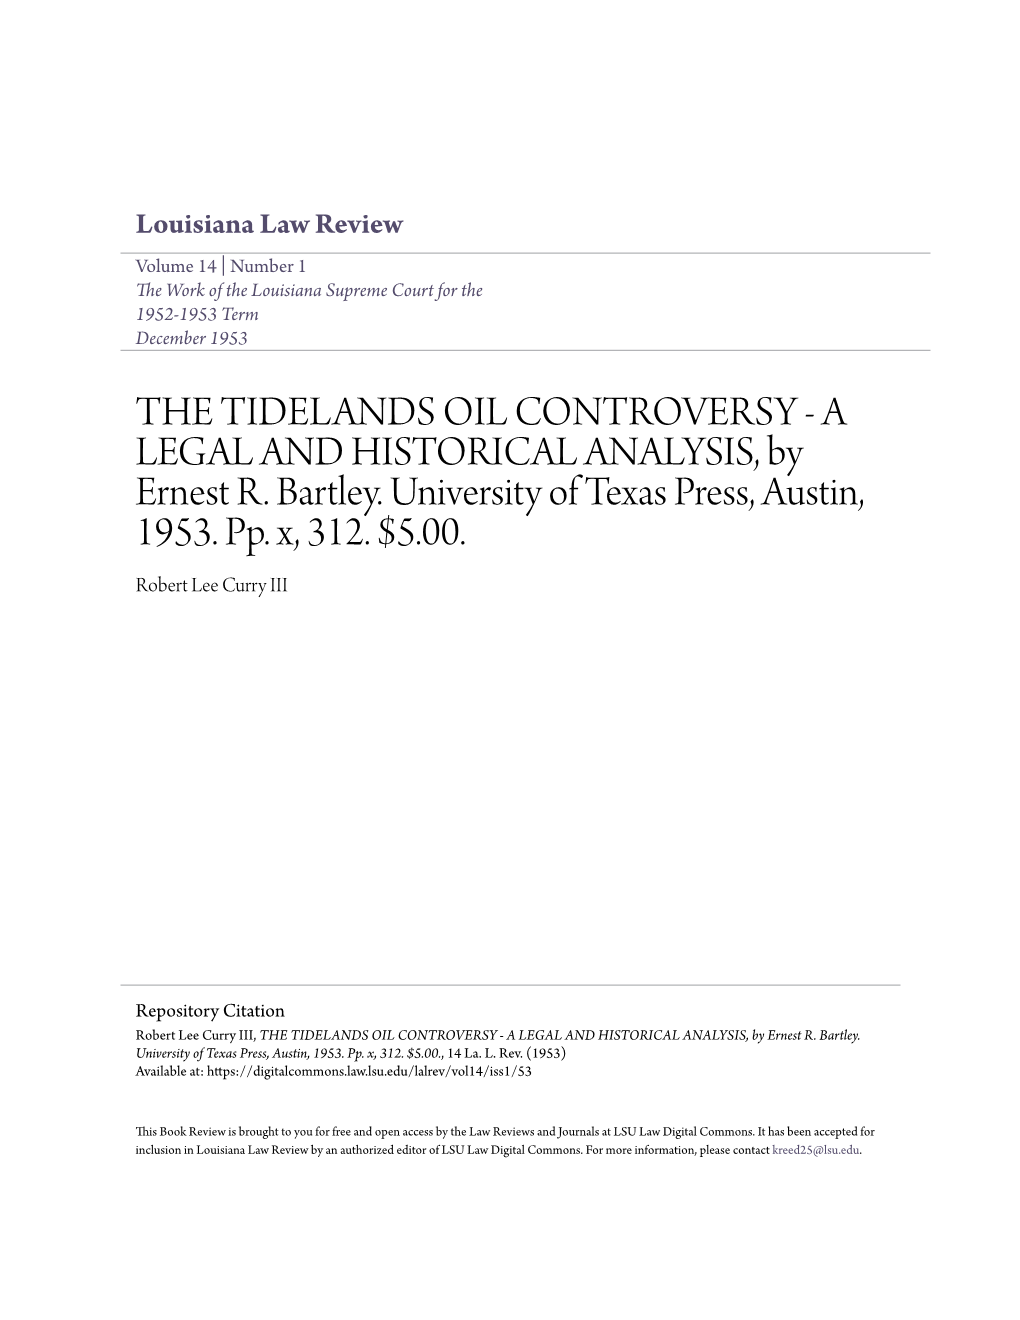 THE TIDELANDS OIL CONTROVERSY - a LEGAL and HISTORICAL ANALYSIS, by Ernest R